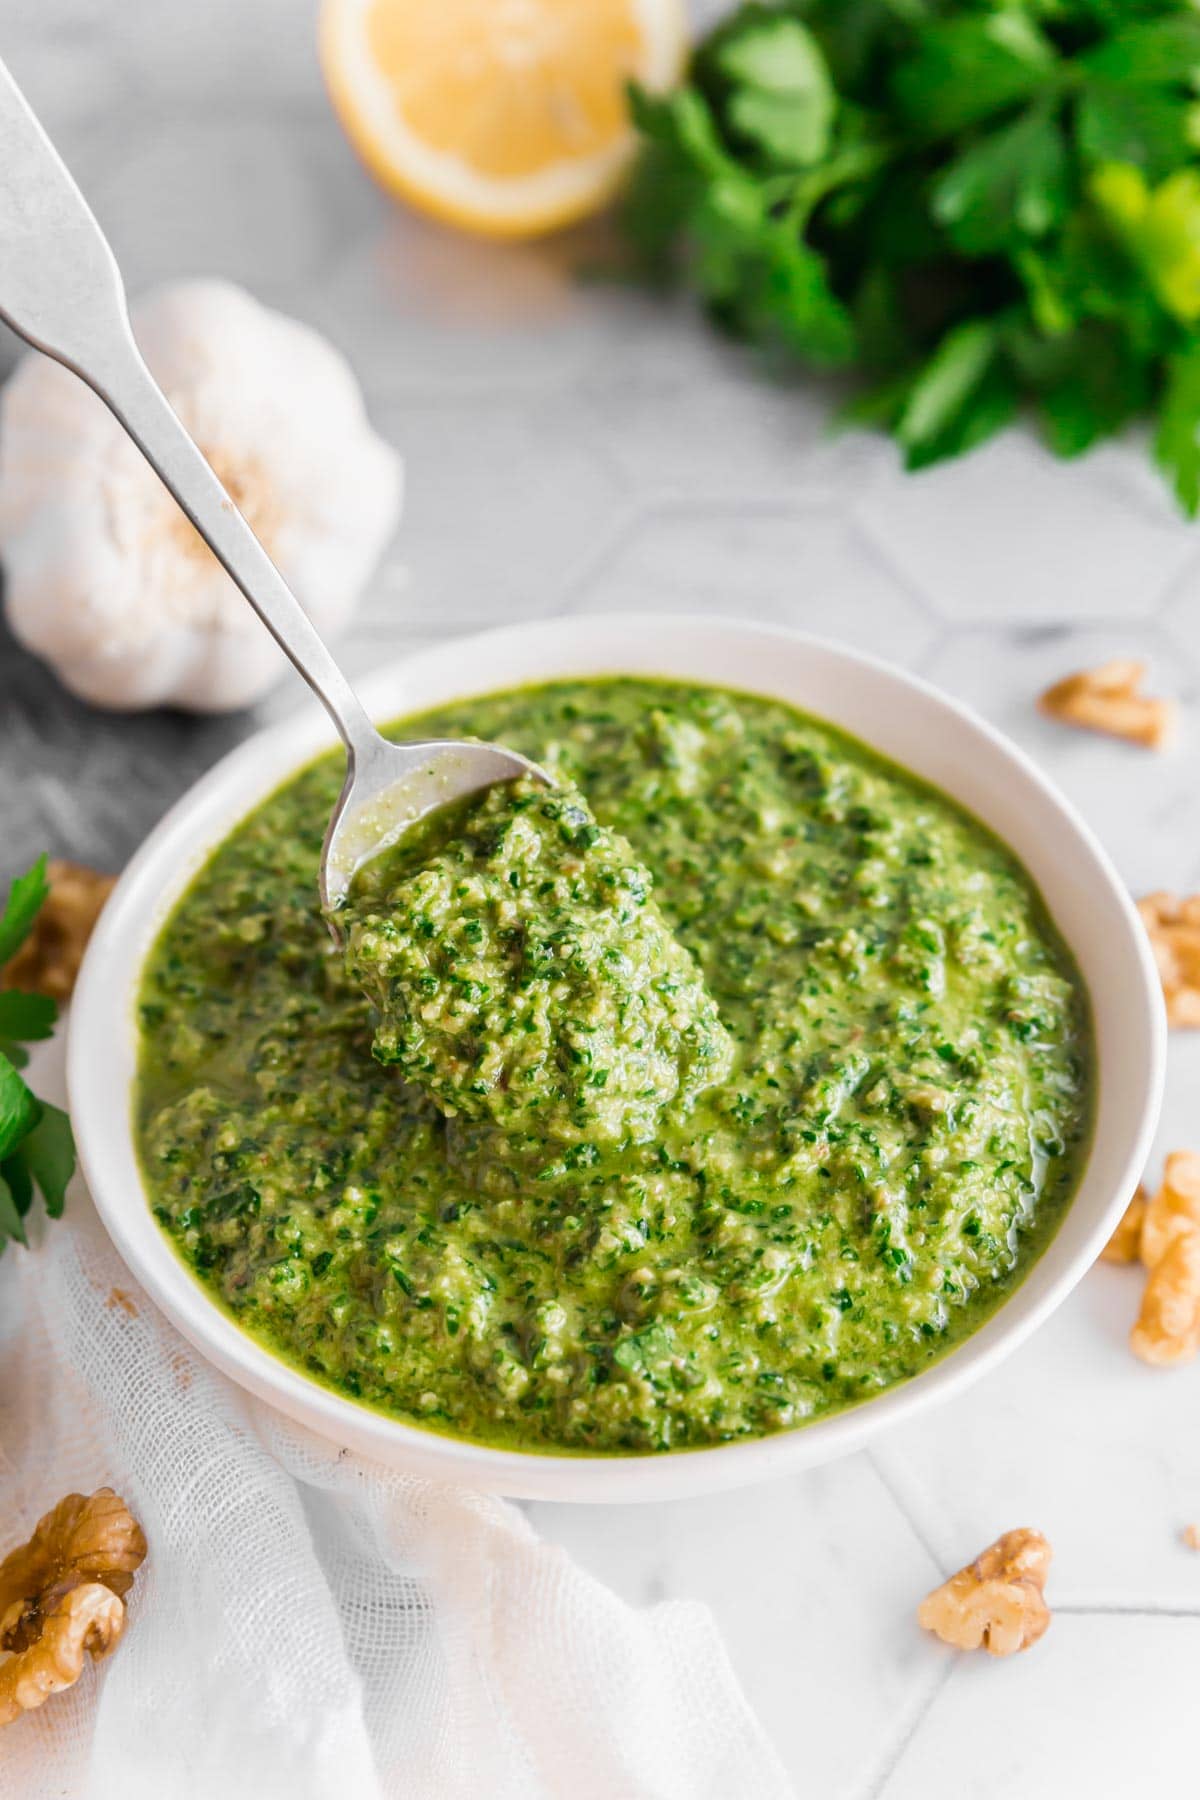 A photo of a bowl of vegan parsley walnut pesto with a spoon in it surrounded by a bulb of garlic, half a lemon, a bunch of parsley and walnuts on a table.